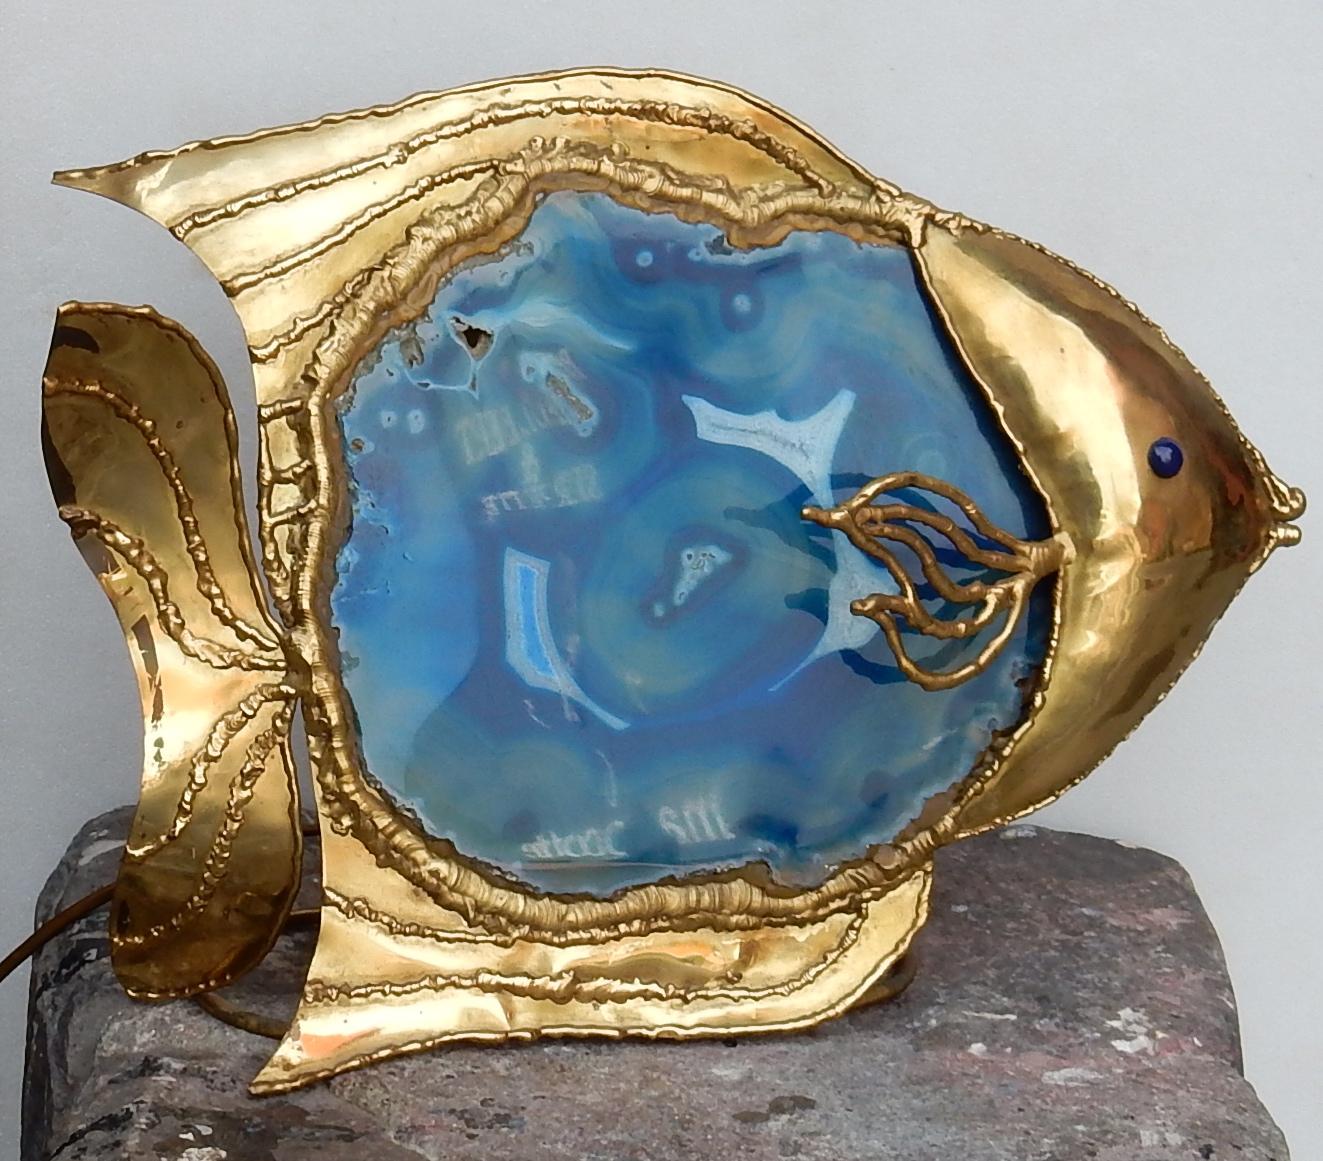 Golden brass fish lamp with blue agate, circa 1970, 1 bulb, good condition.